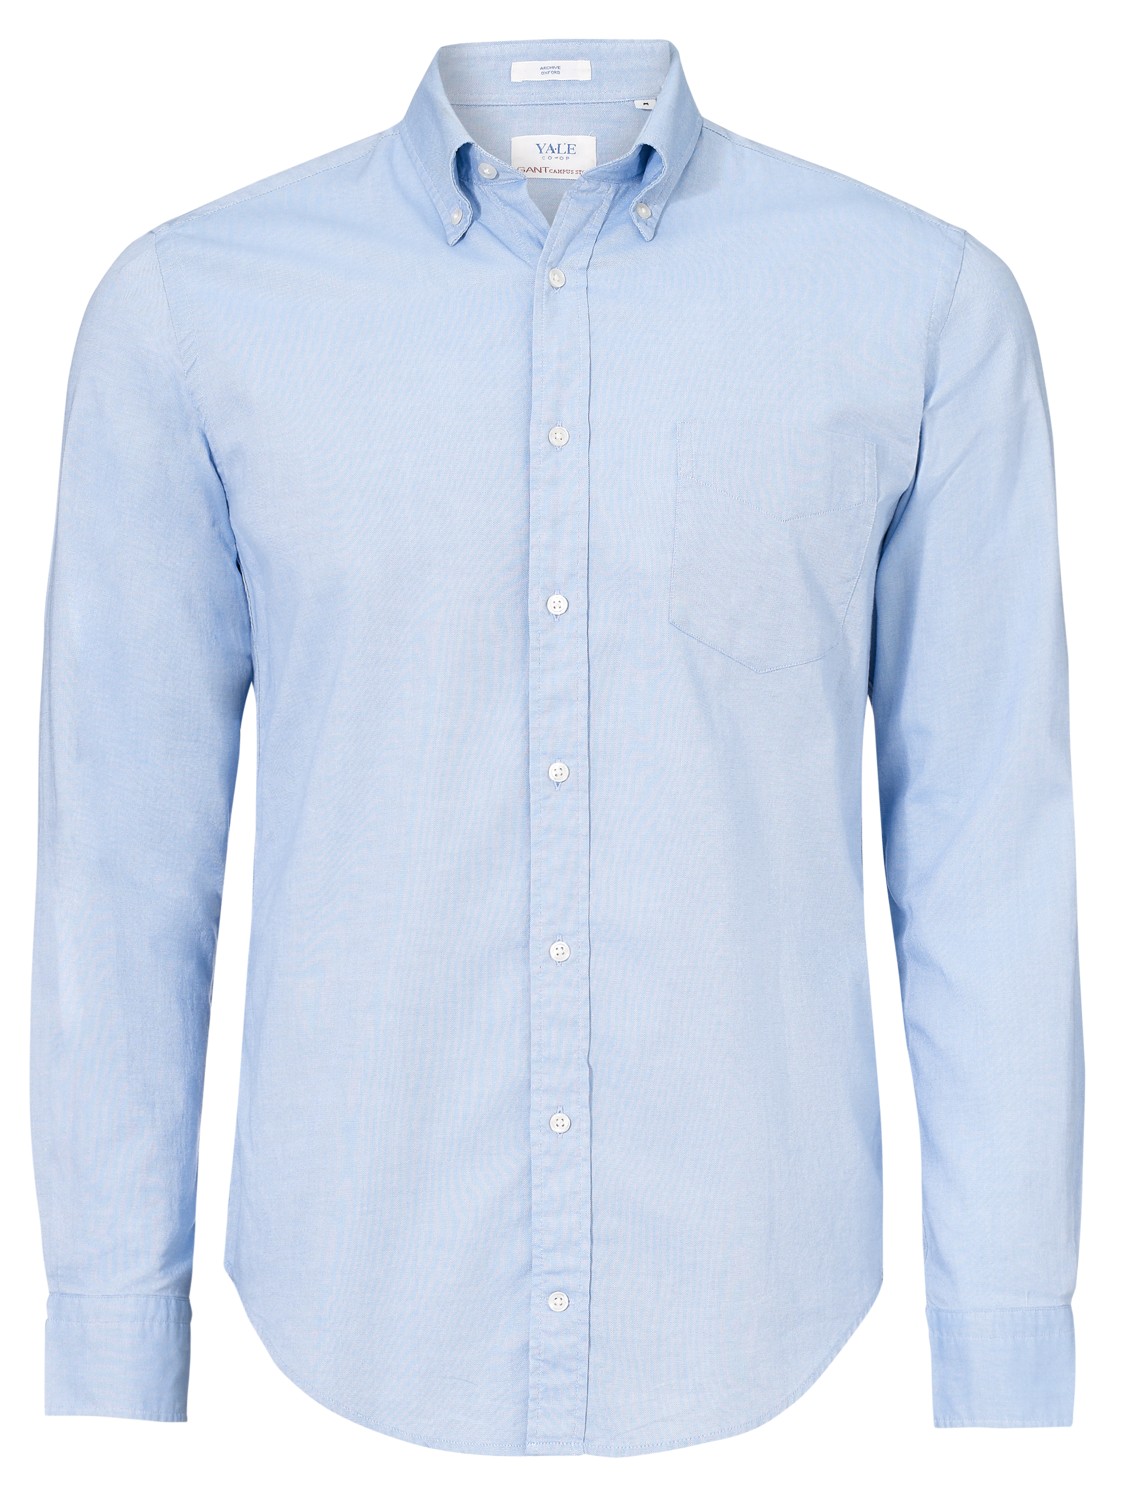 Gant Yale Archive Oxford Shirt in Blue for Men - Lyst